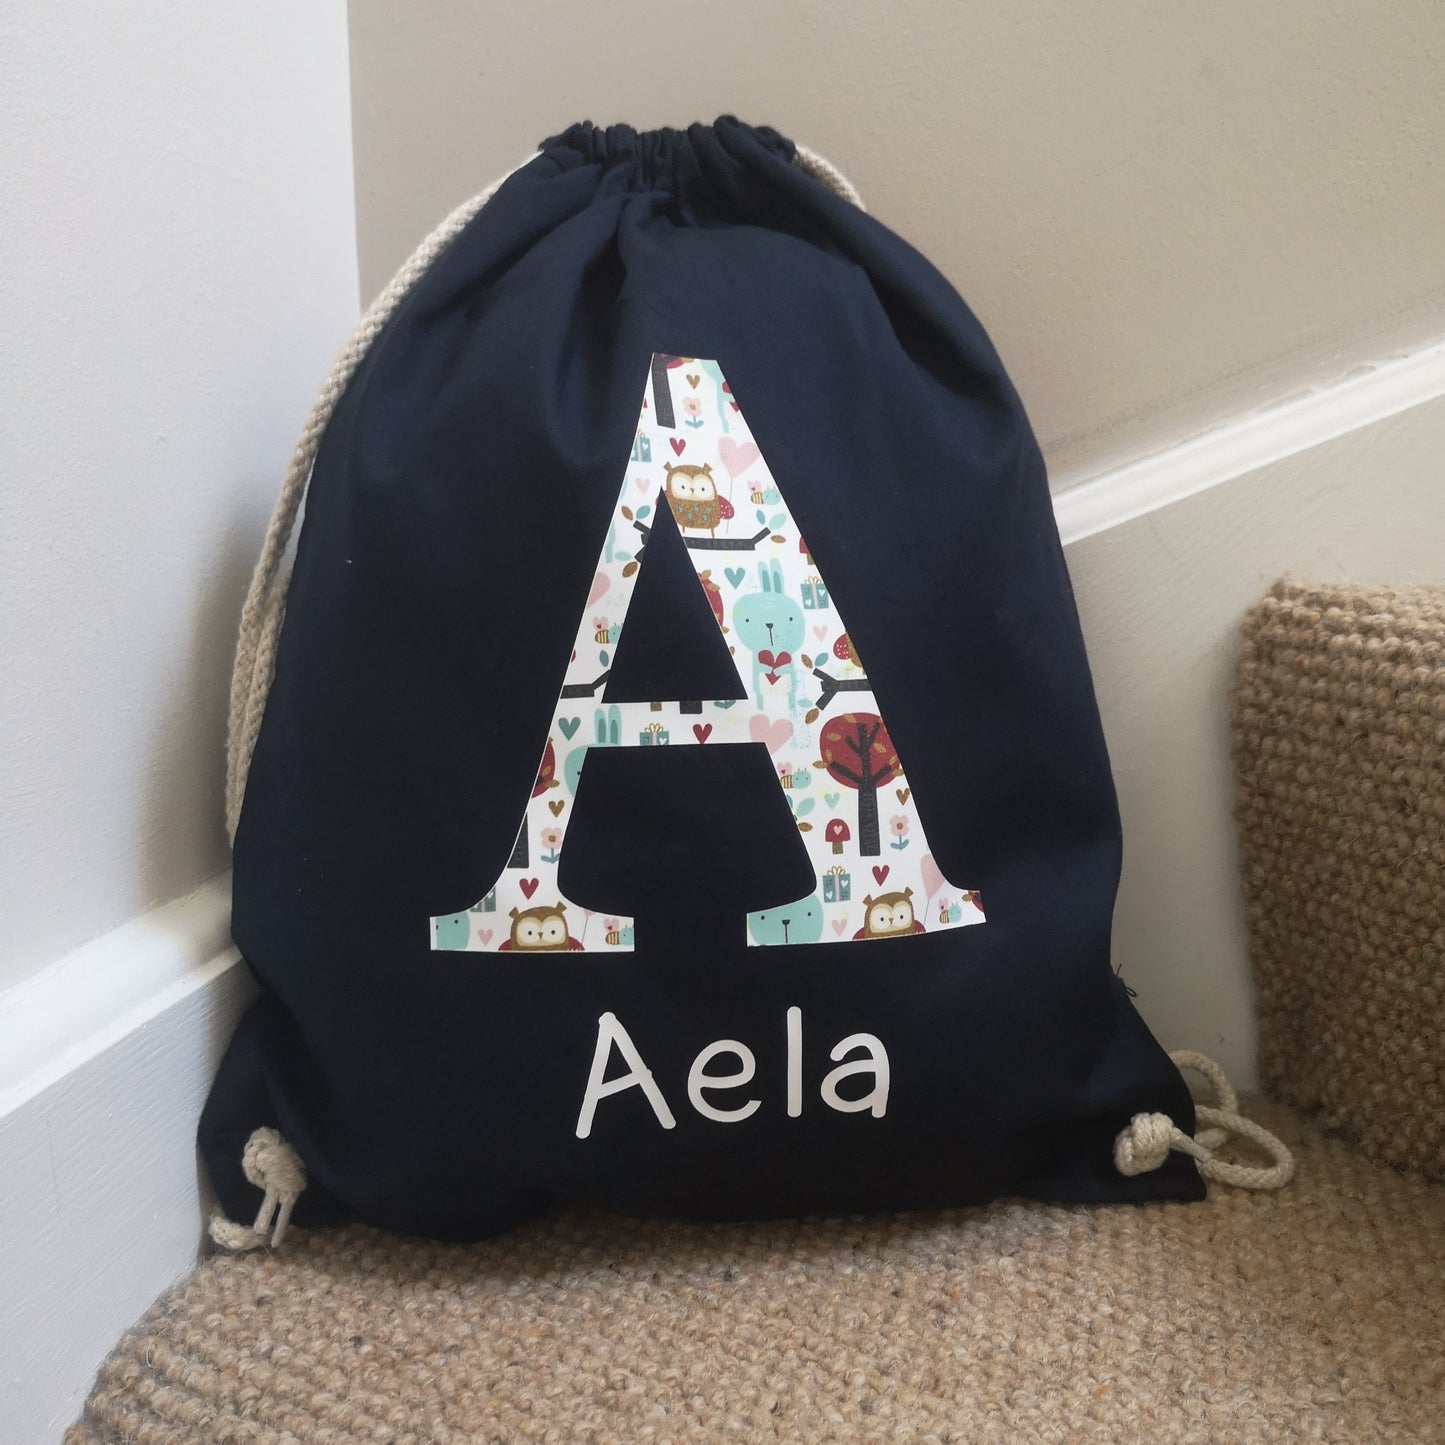 A royal navy personalised light drawstring bag with a patterned Initial and their name underneath